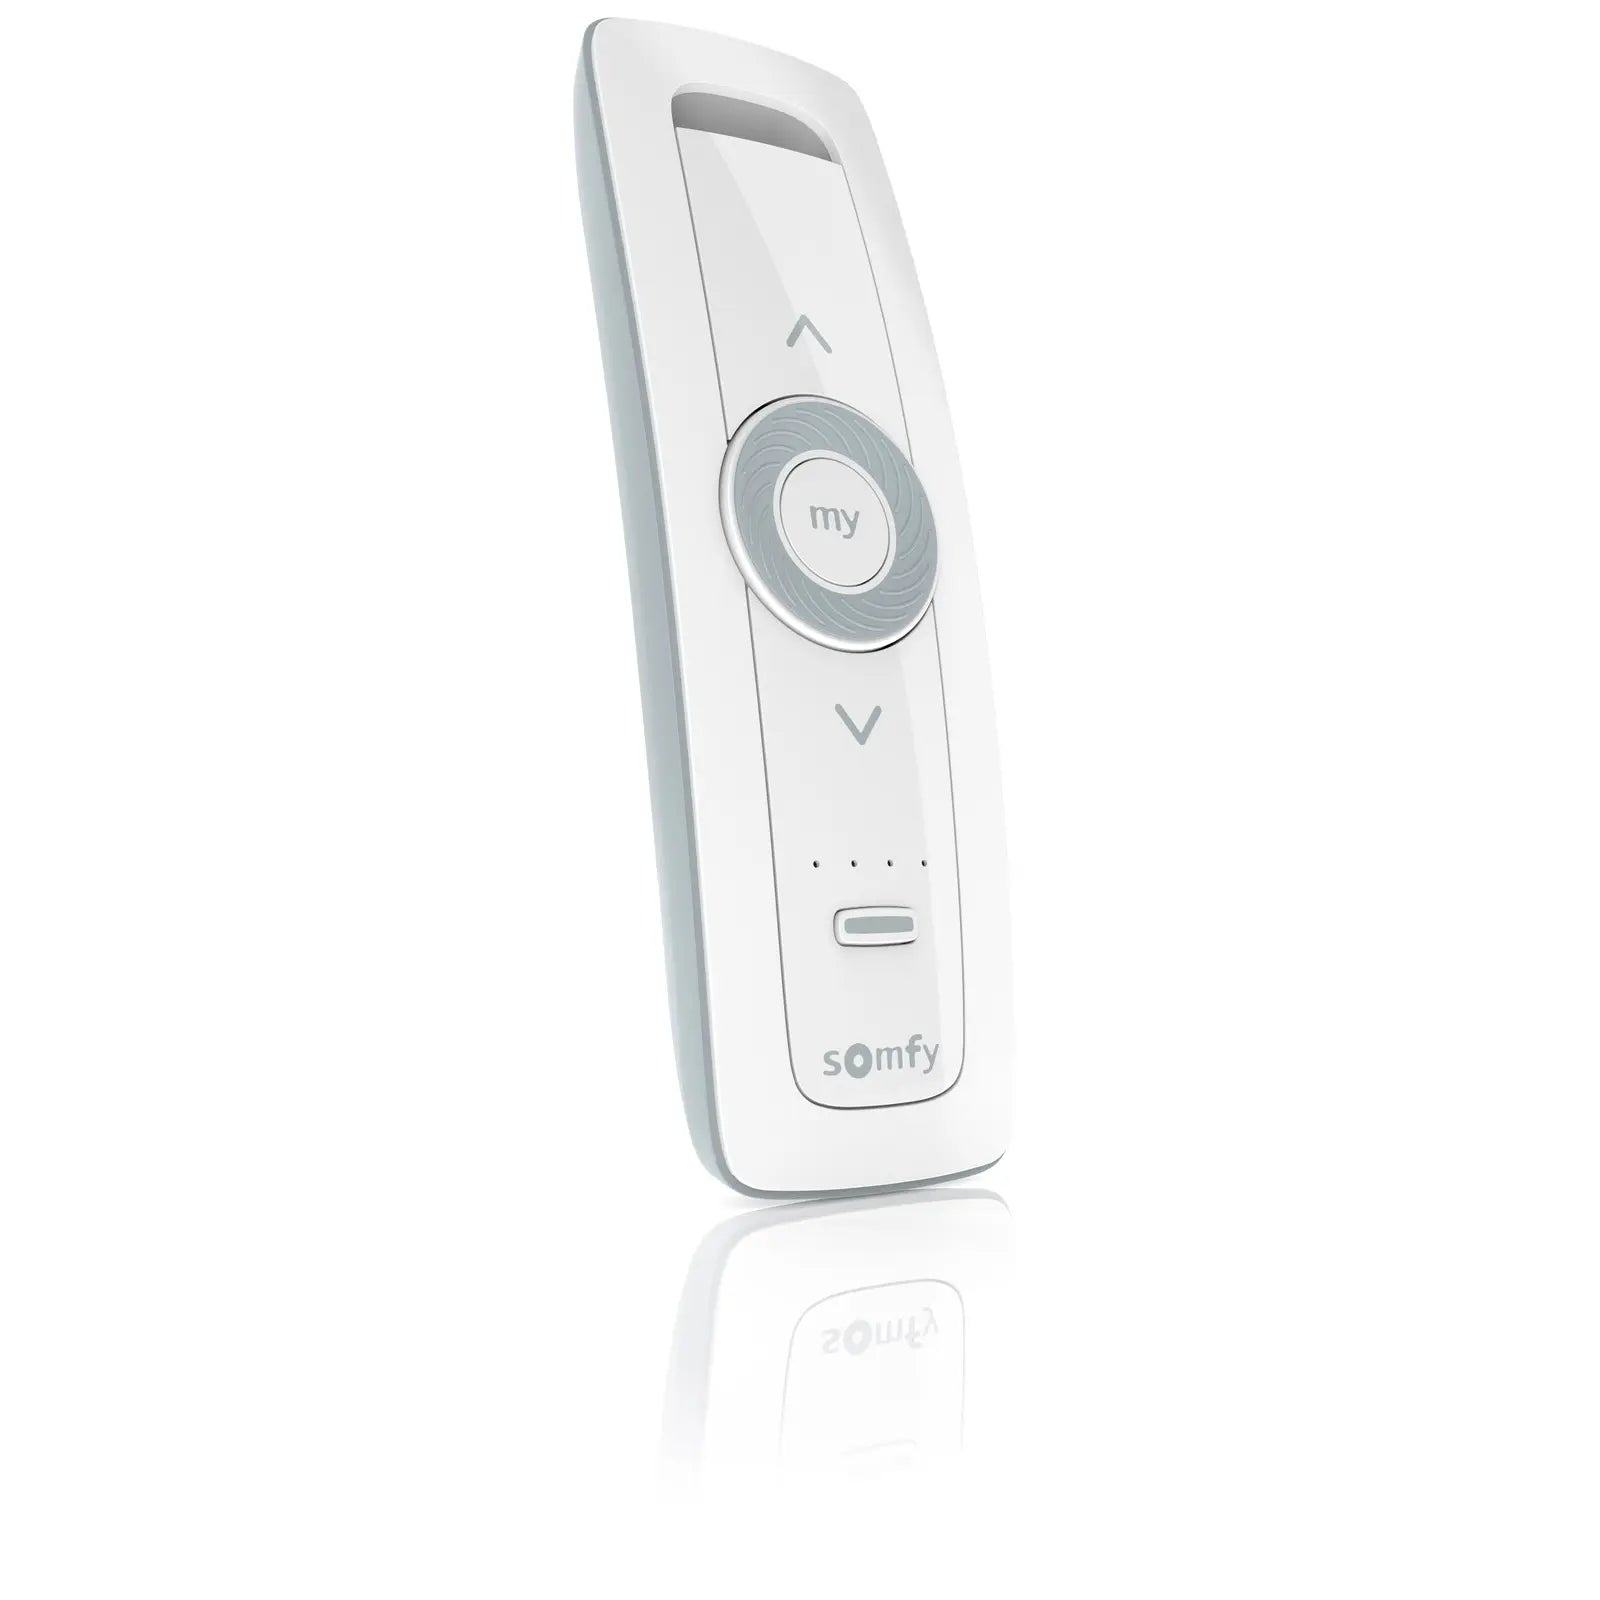 Somfy Situo Variation Shade Remote Control